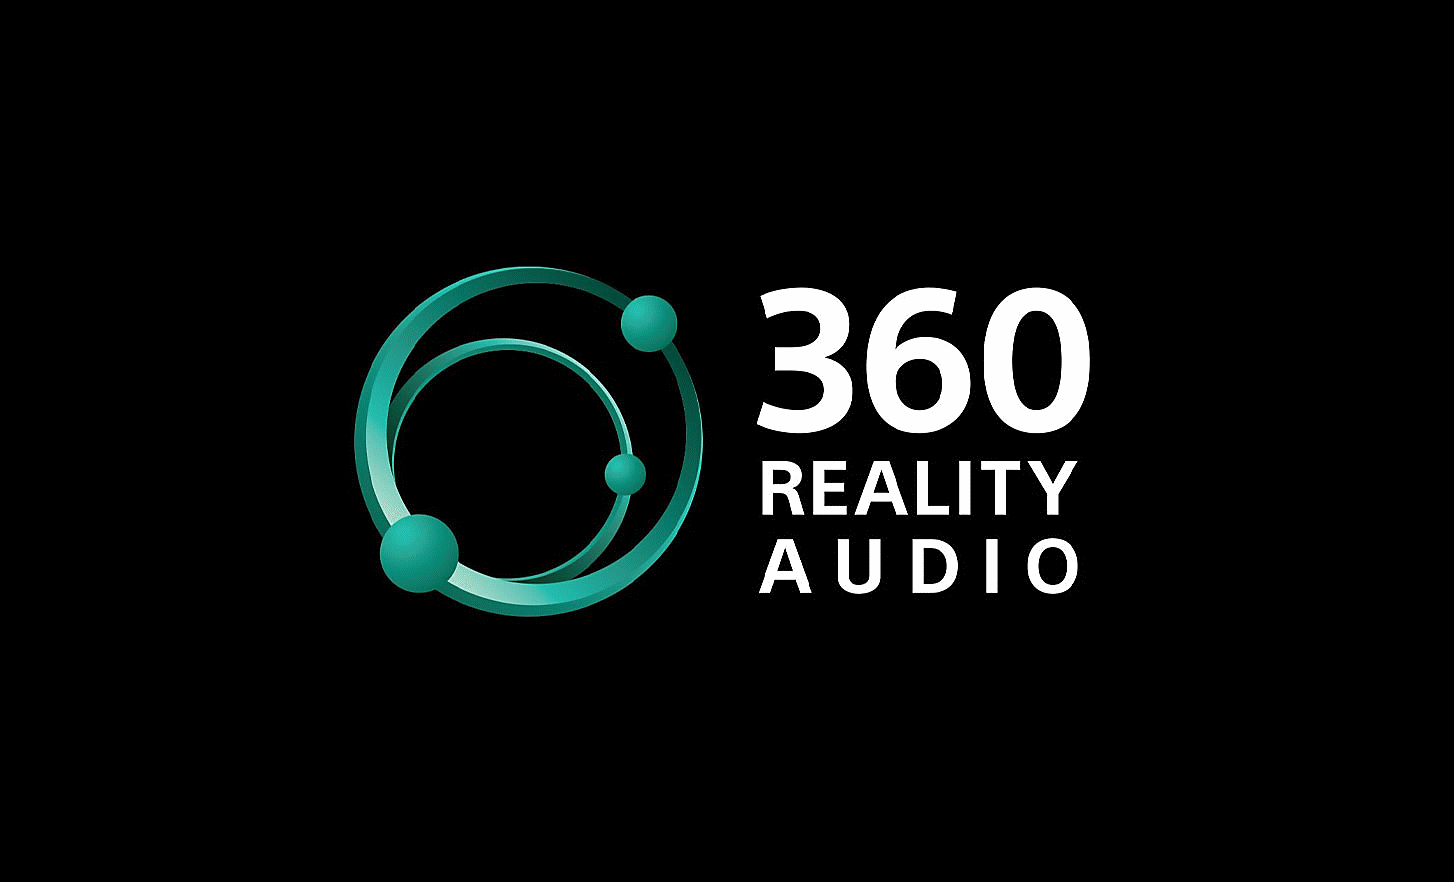 Video of the 360 Reality Audio benefits.